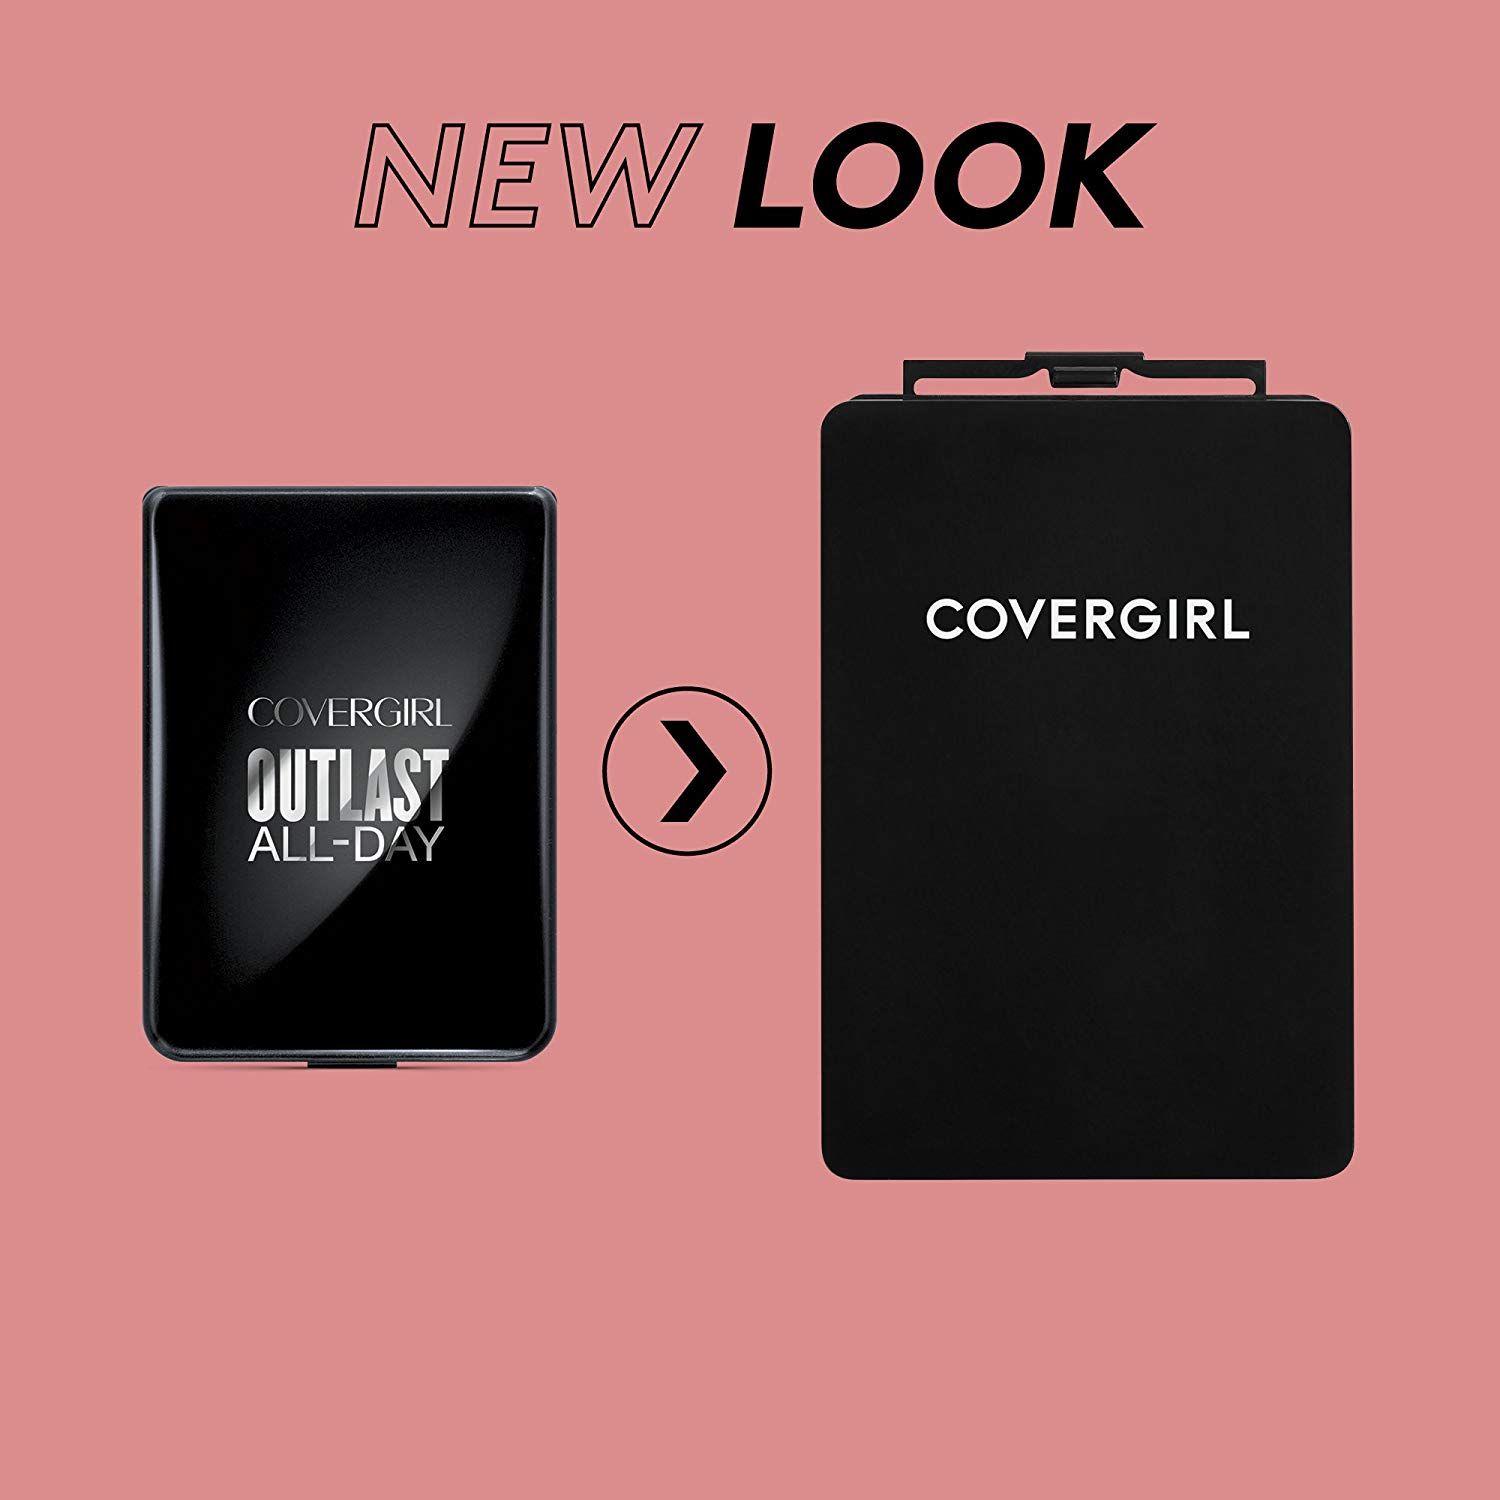 Covergirl Logo - Amazon.com : COVERGIRL Outlast All-Day Ultimate Finish 3-in-1 ...